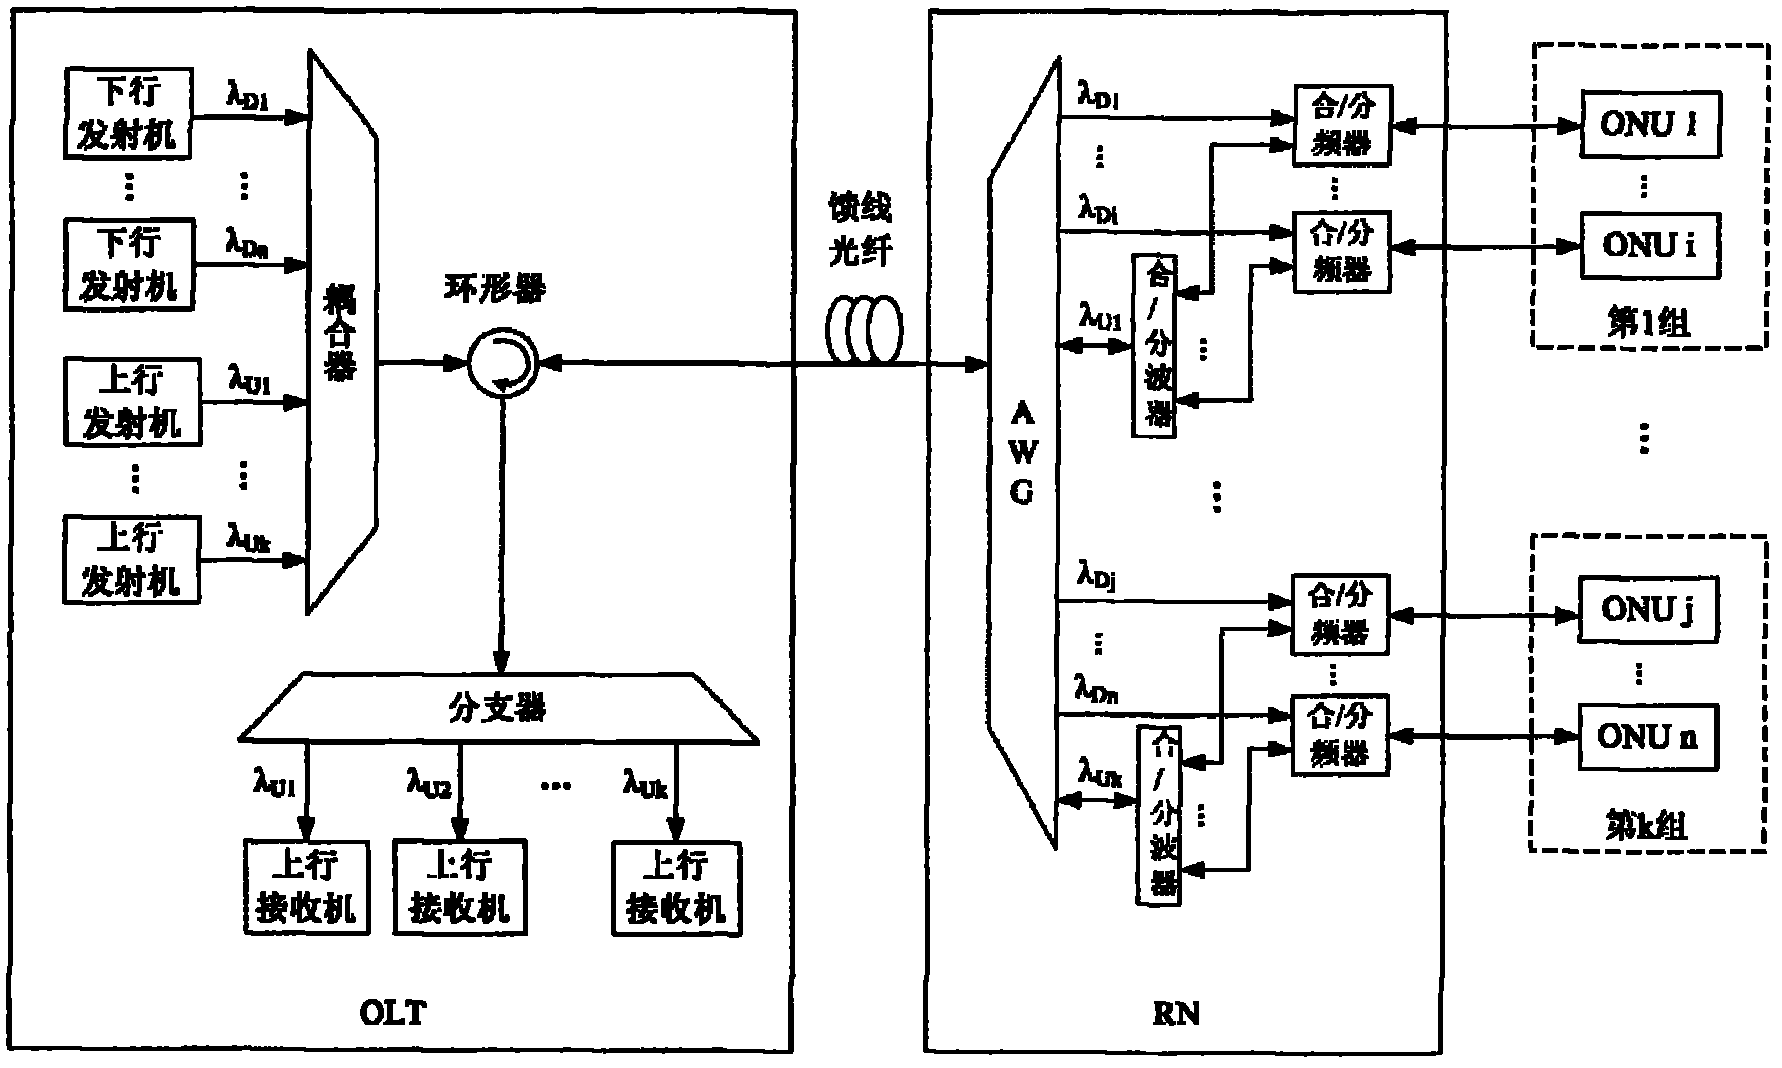 Method for enhancing Quality of Service (QoS) of uplink business in hybrid passive optical network